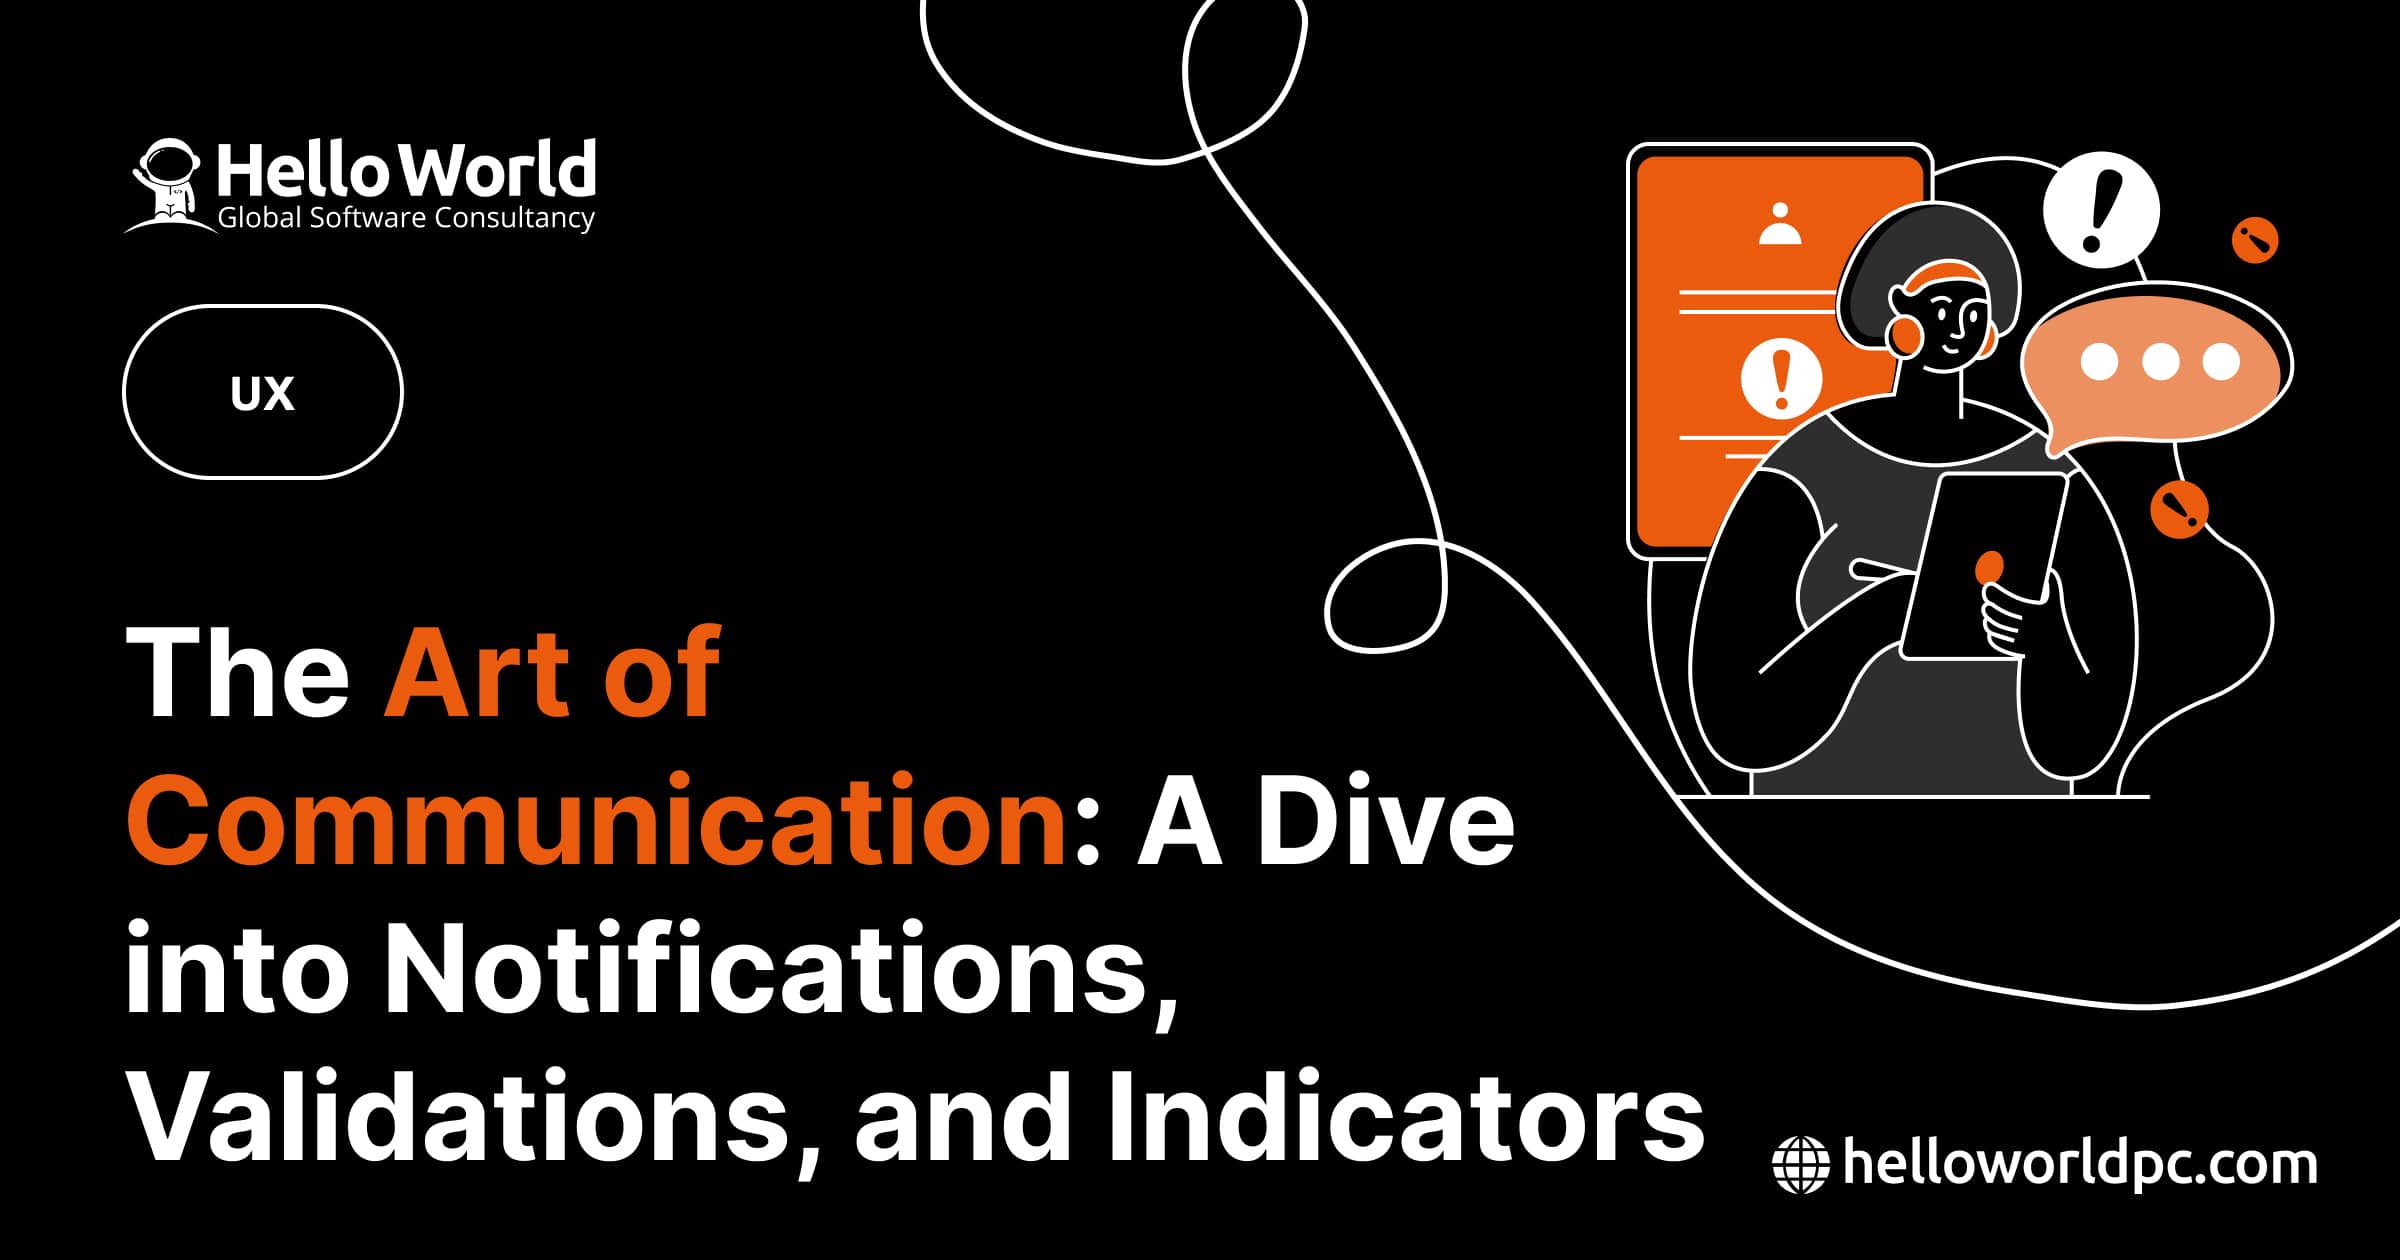 The Art of Communication: A Dive into Notifications, Validations, and Indicators